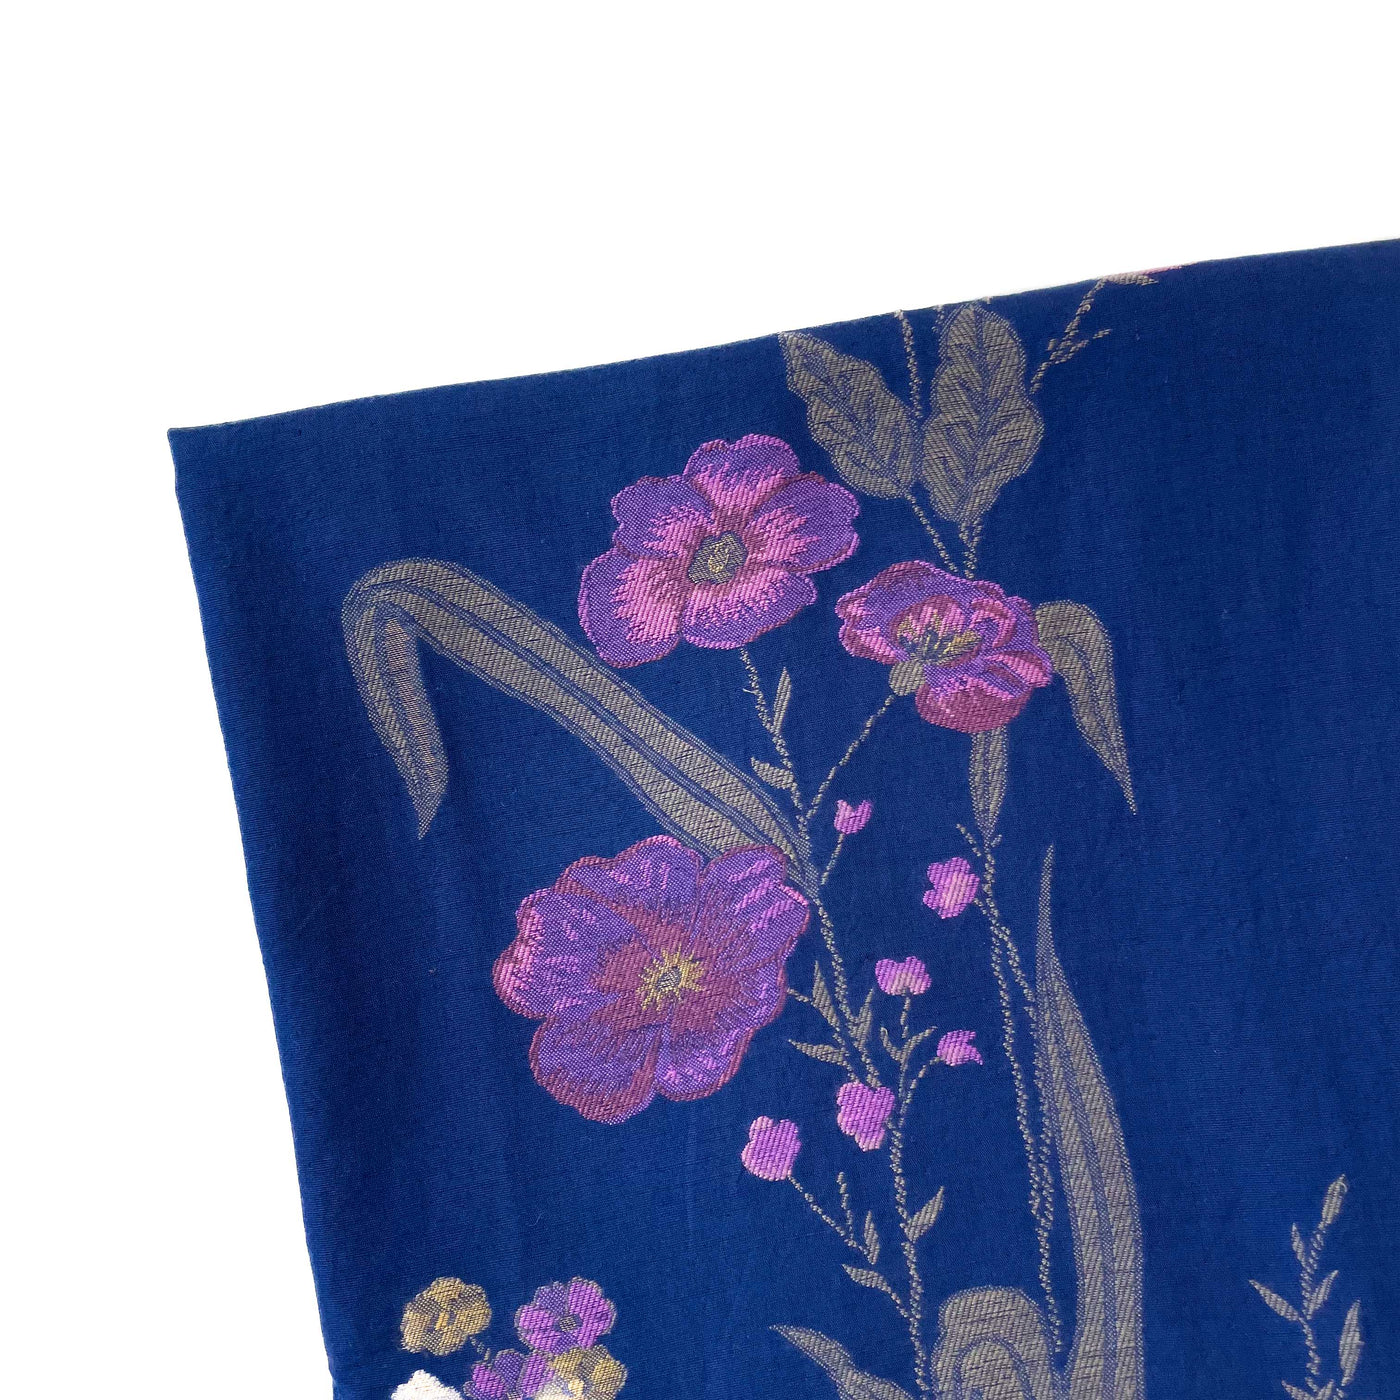 Woven Suit Set Unstitched Suit Royal Blue & Pink Wild Flowers Colors of Summer Linen Kurta Fabric (2.5 Meters) | and Cotton Pyjama (2.5 Meters) | Unstitched Combo Set